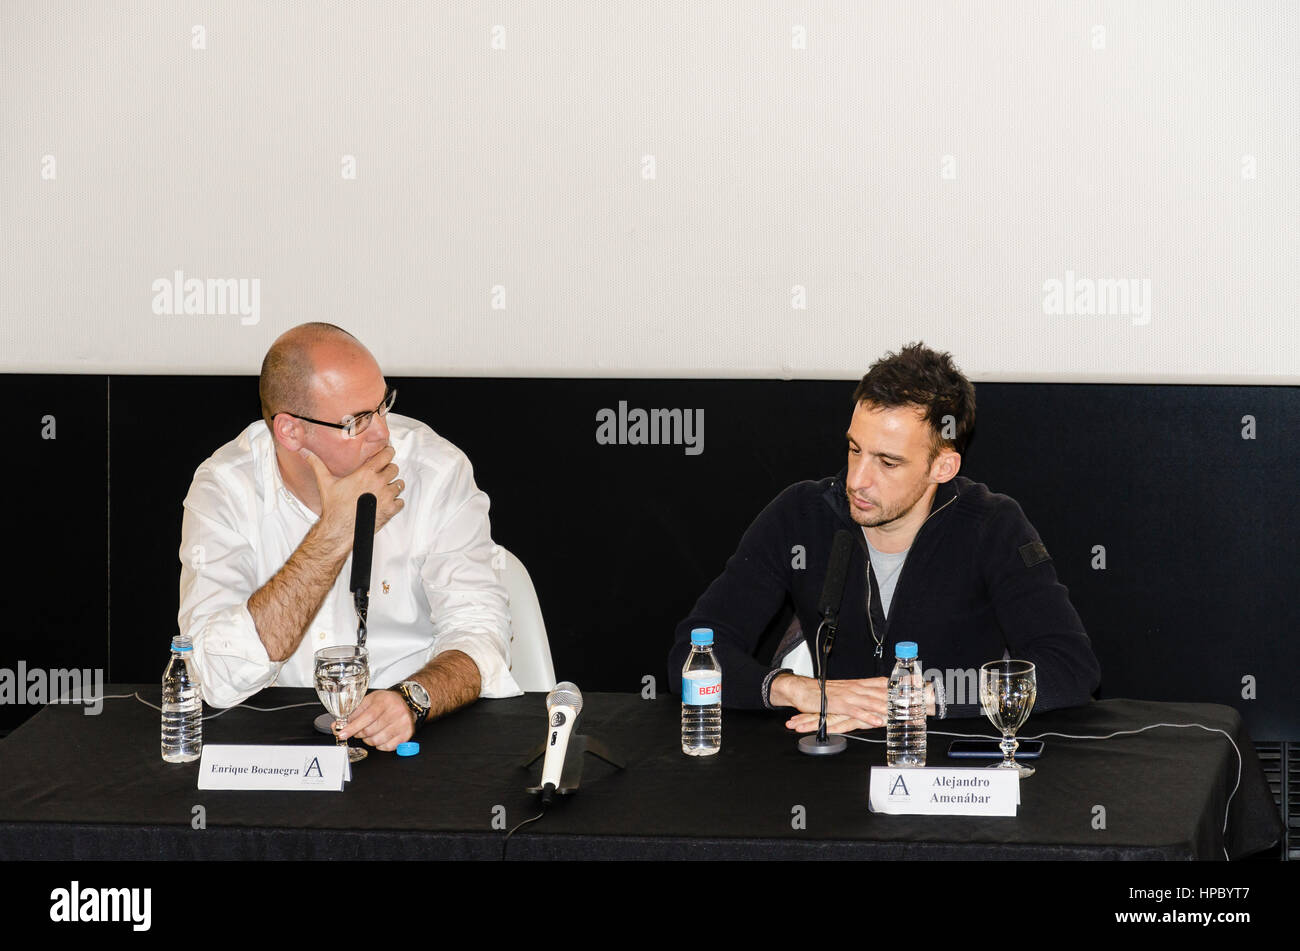 Madrid, Spain. 20th February, 2017. Meeting with the Spanish filmaker Alejandro Amenábar in the Film Academy (right) Madrid, Spain, on 20th February 2017. Credit: Enrique Davó/Alamy Live News. Stock Photo